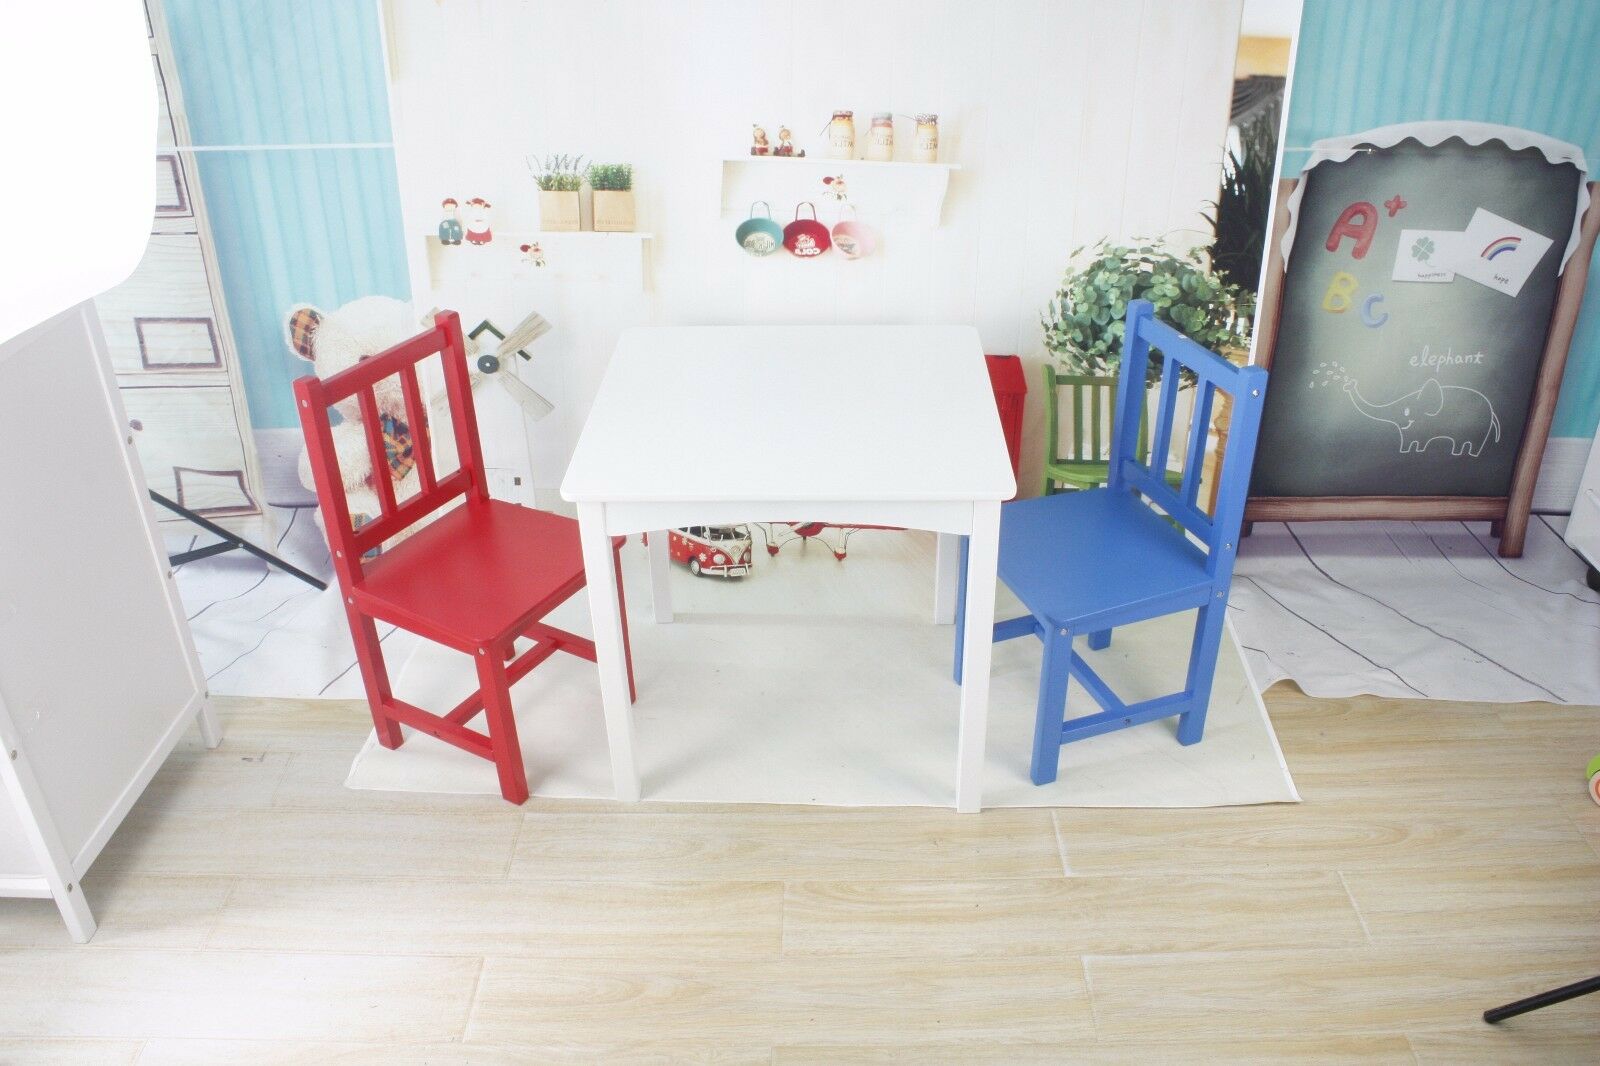 Kids Wooden White Table Desk And Chair Set For Study Home Work Writing Reading